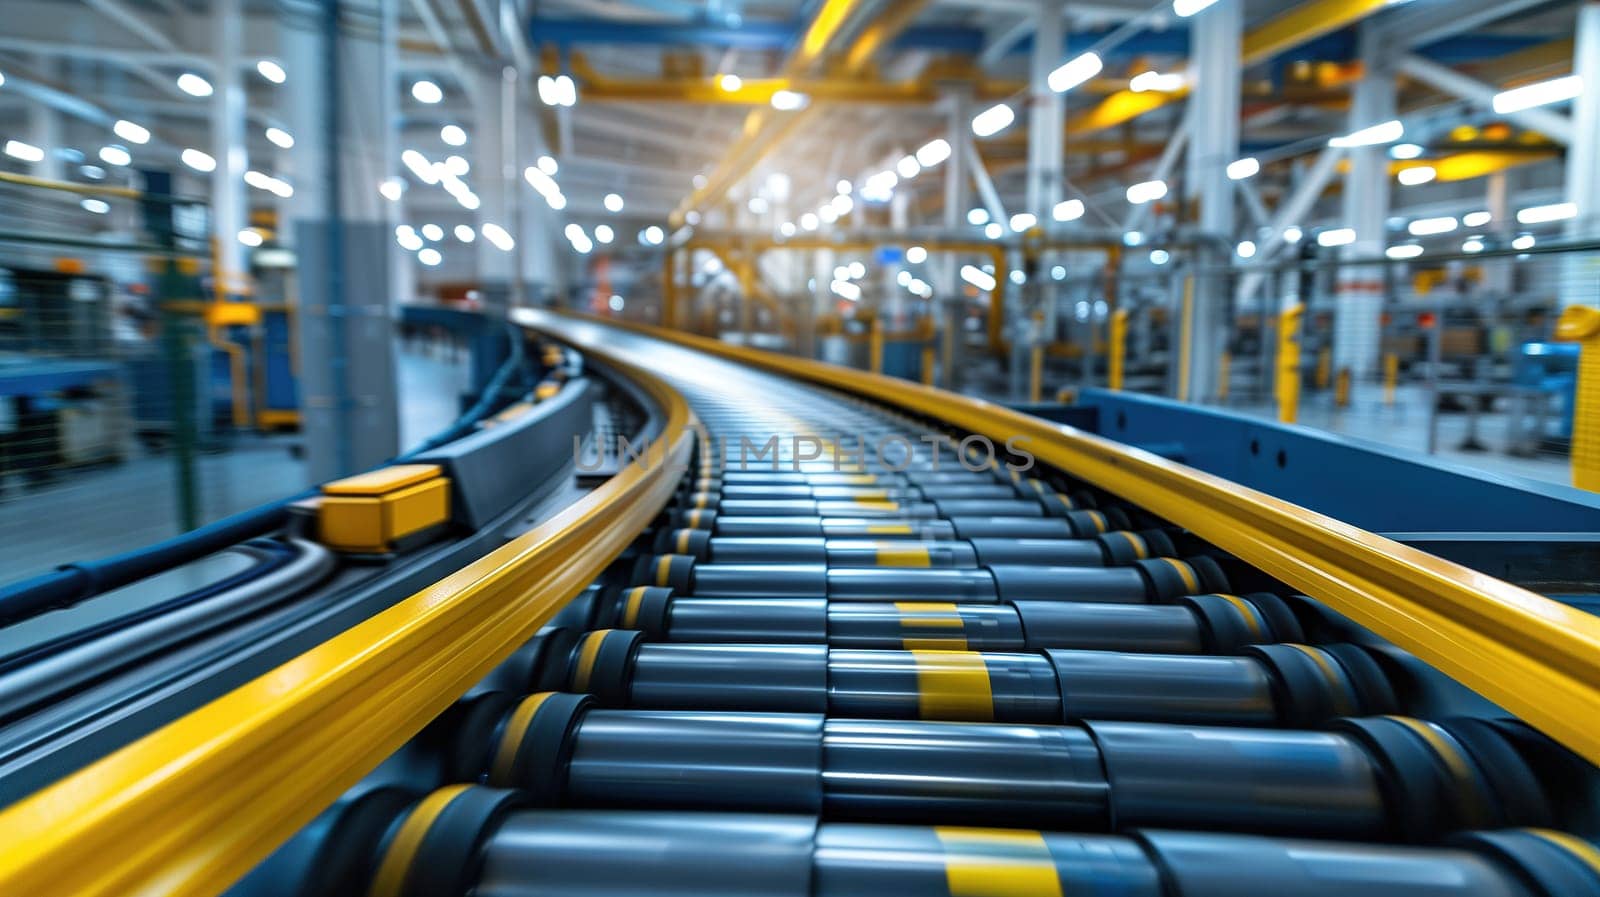 A conveyor belt is shown inside a factory, carrying products along the production line. Machinery, assembly, manufacturing, and automation are visible in the industrial setting.